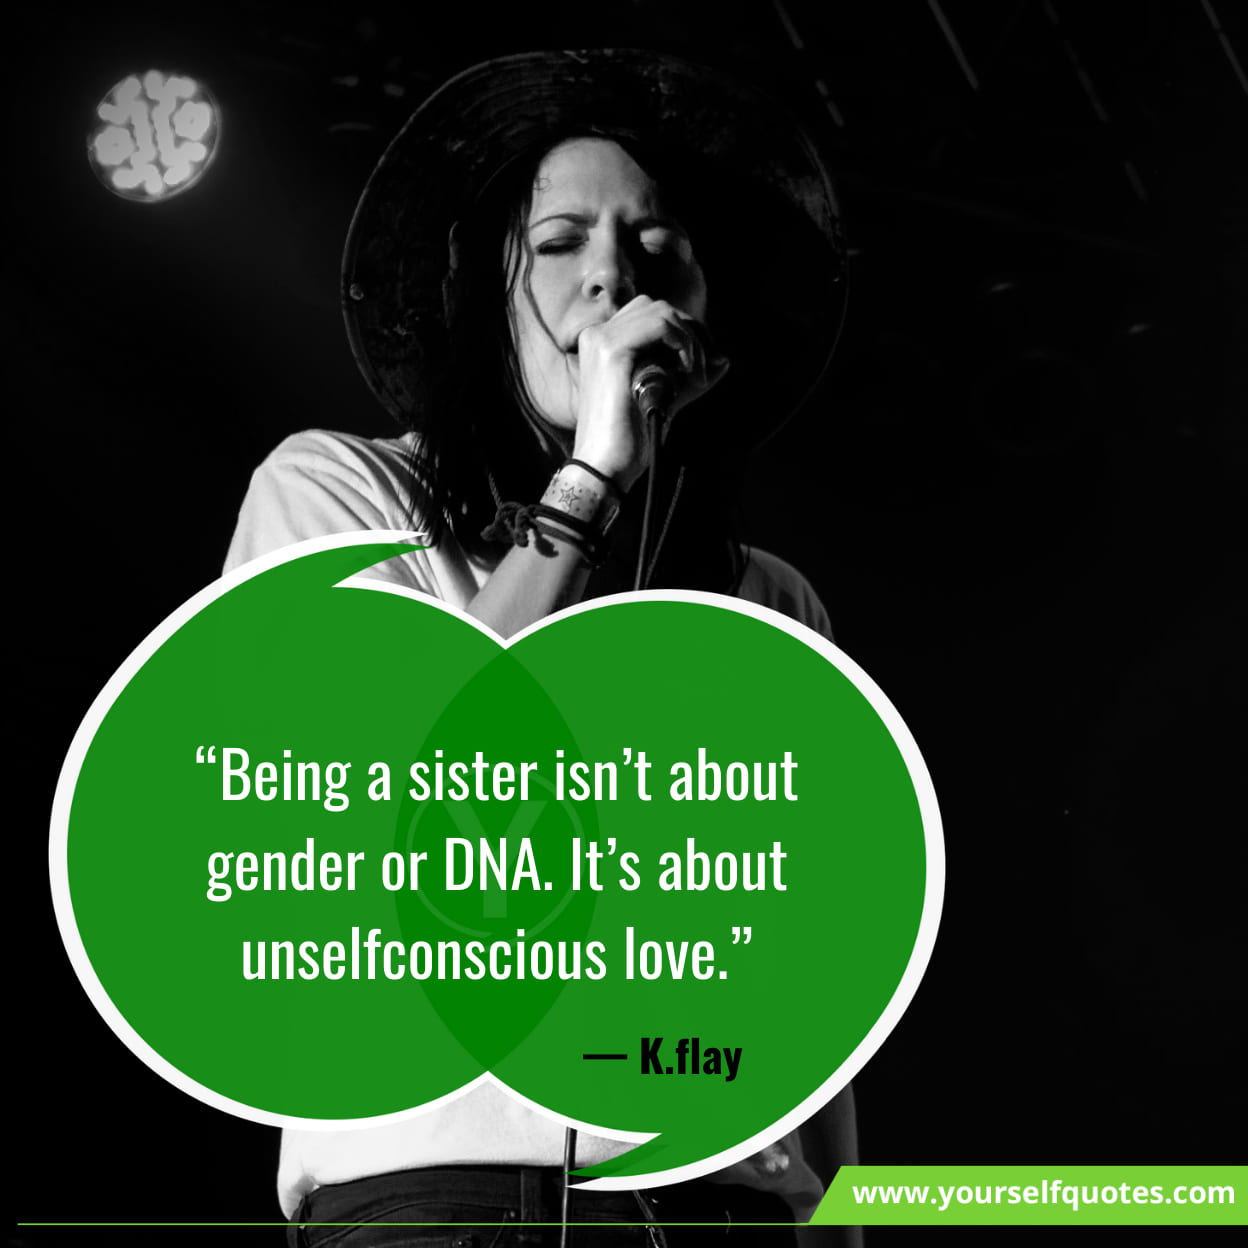 Best Famous Quotes On Sisters